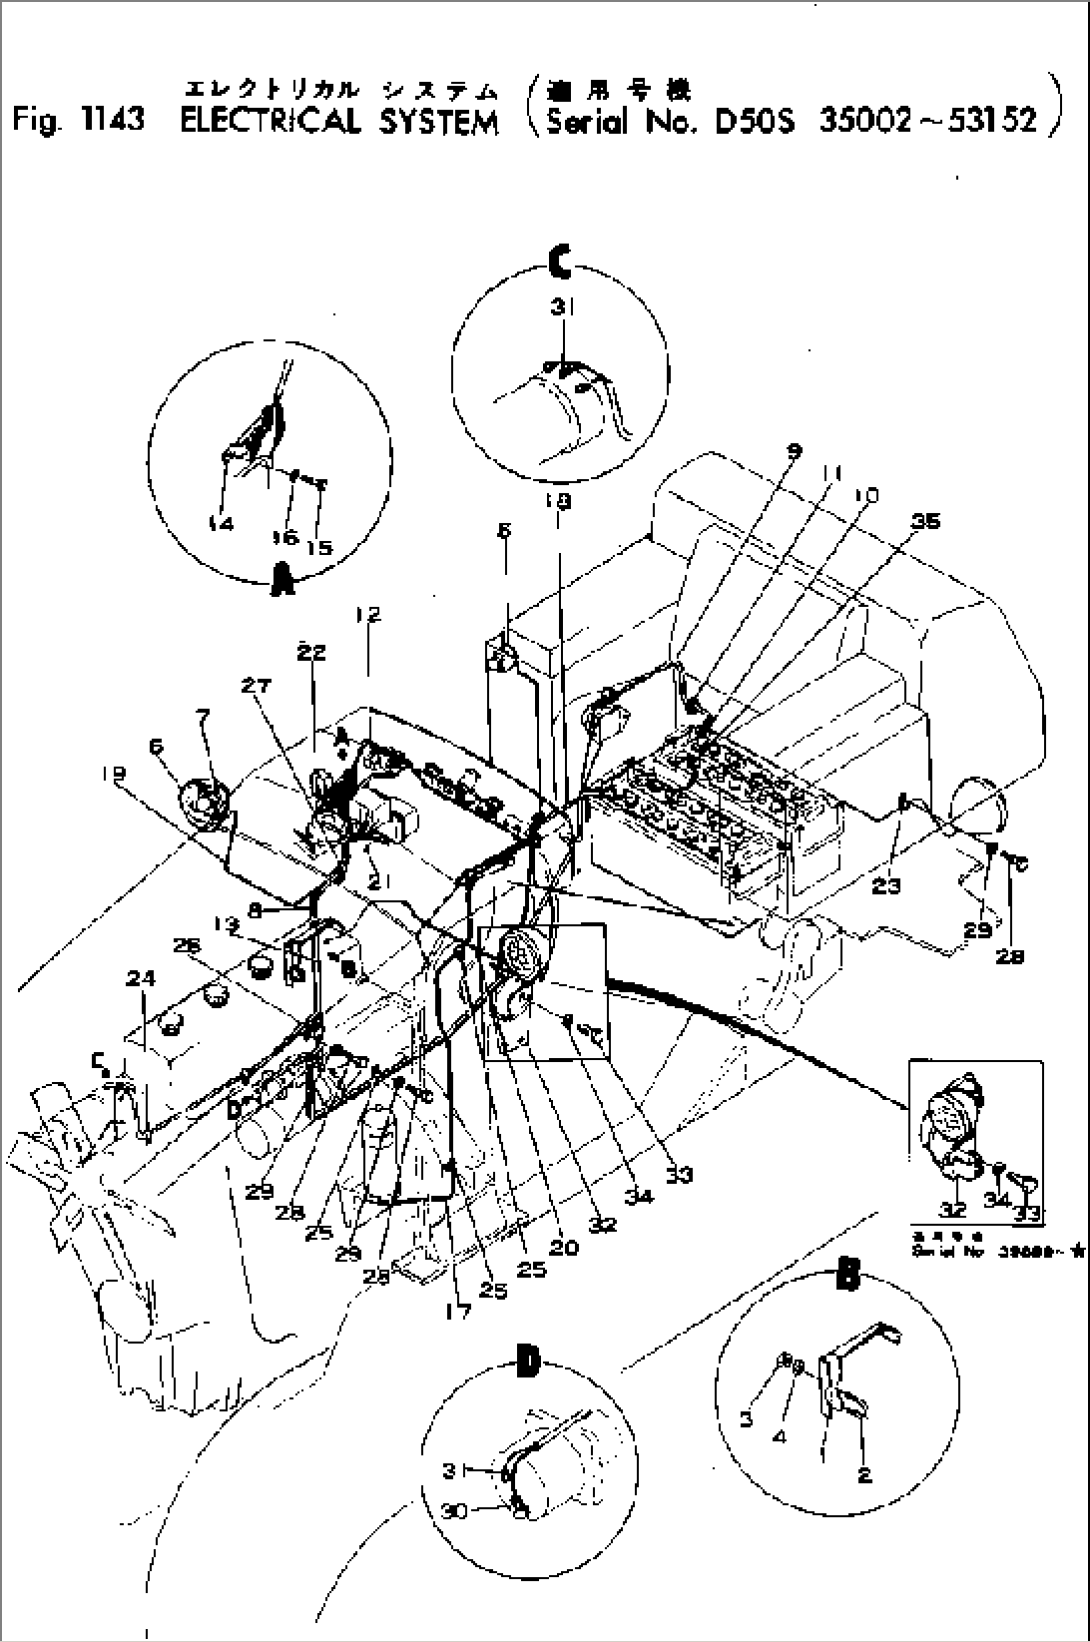 ELECTRICAL SYSTEM(#35002-53152)